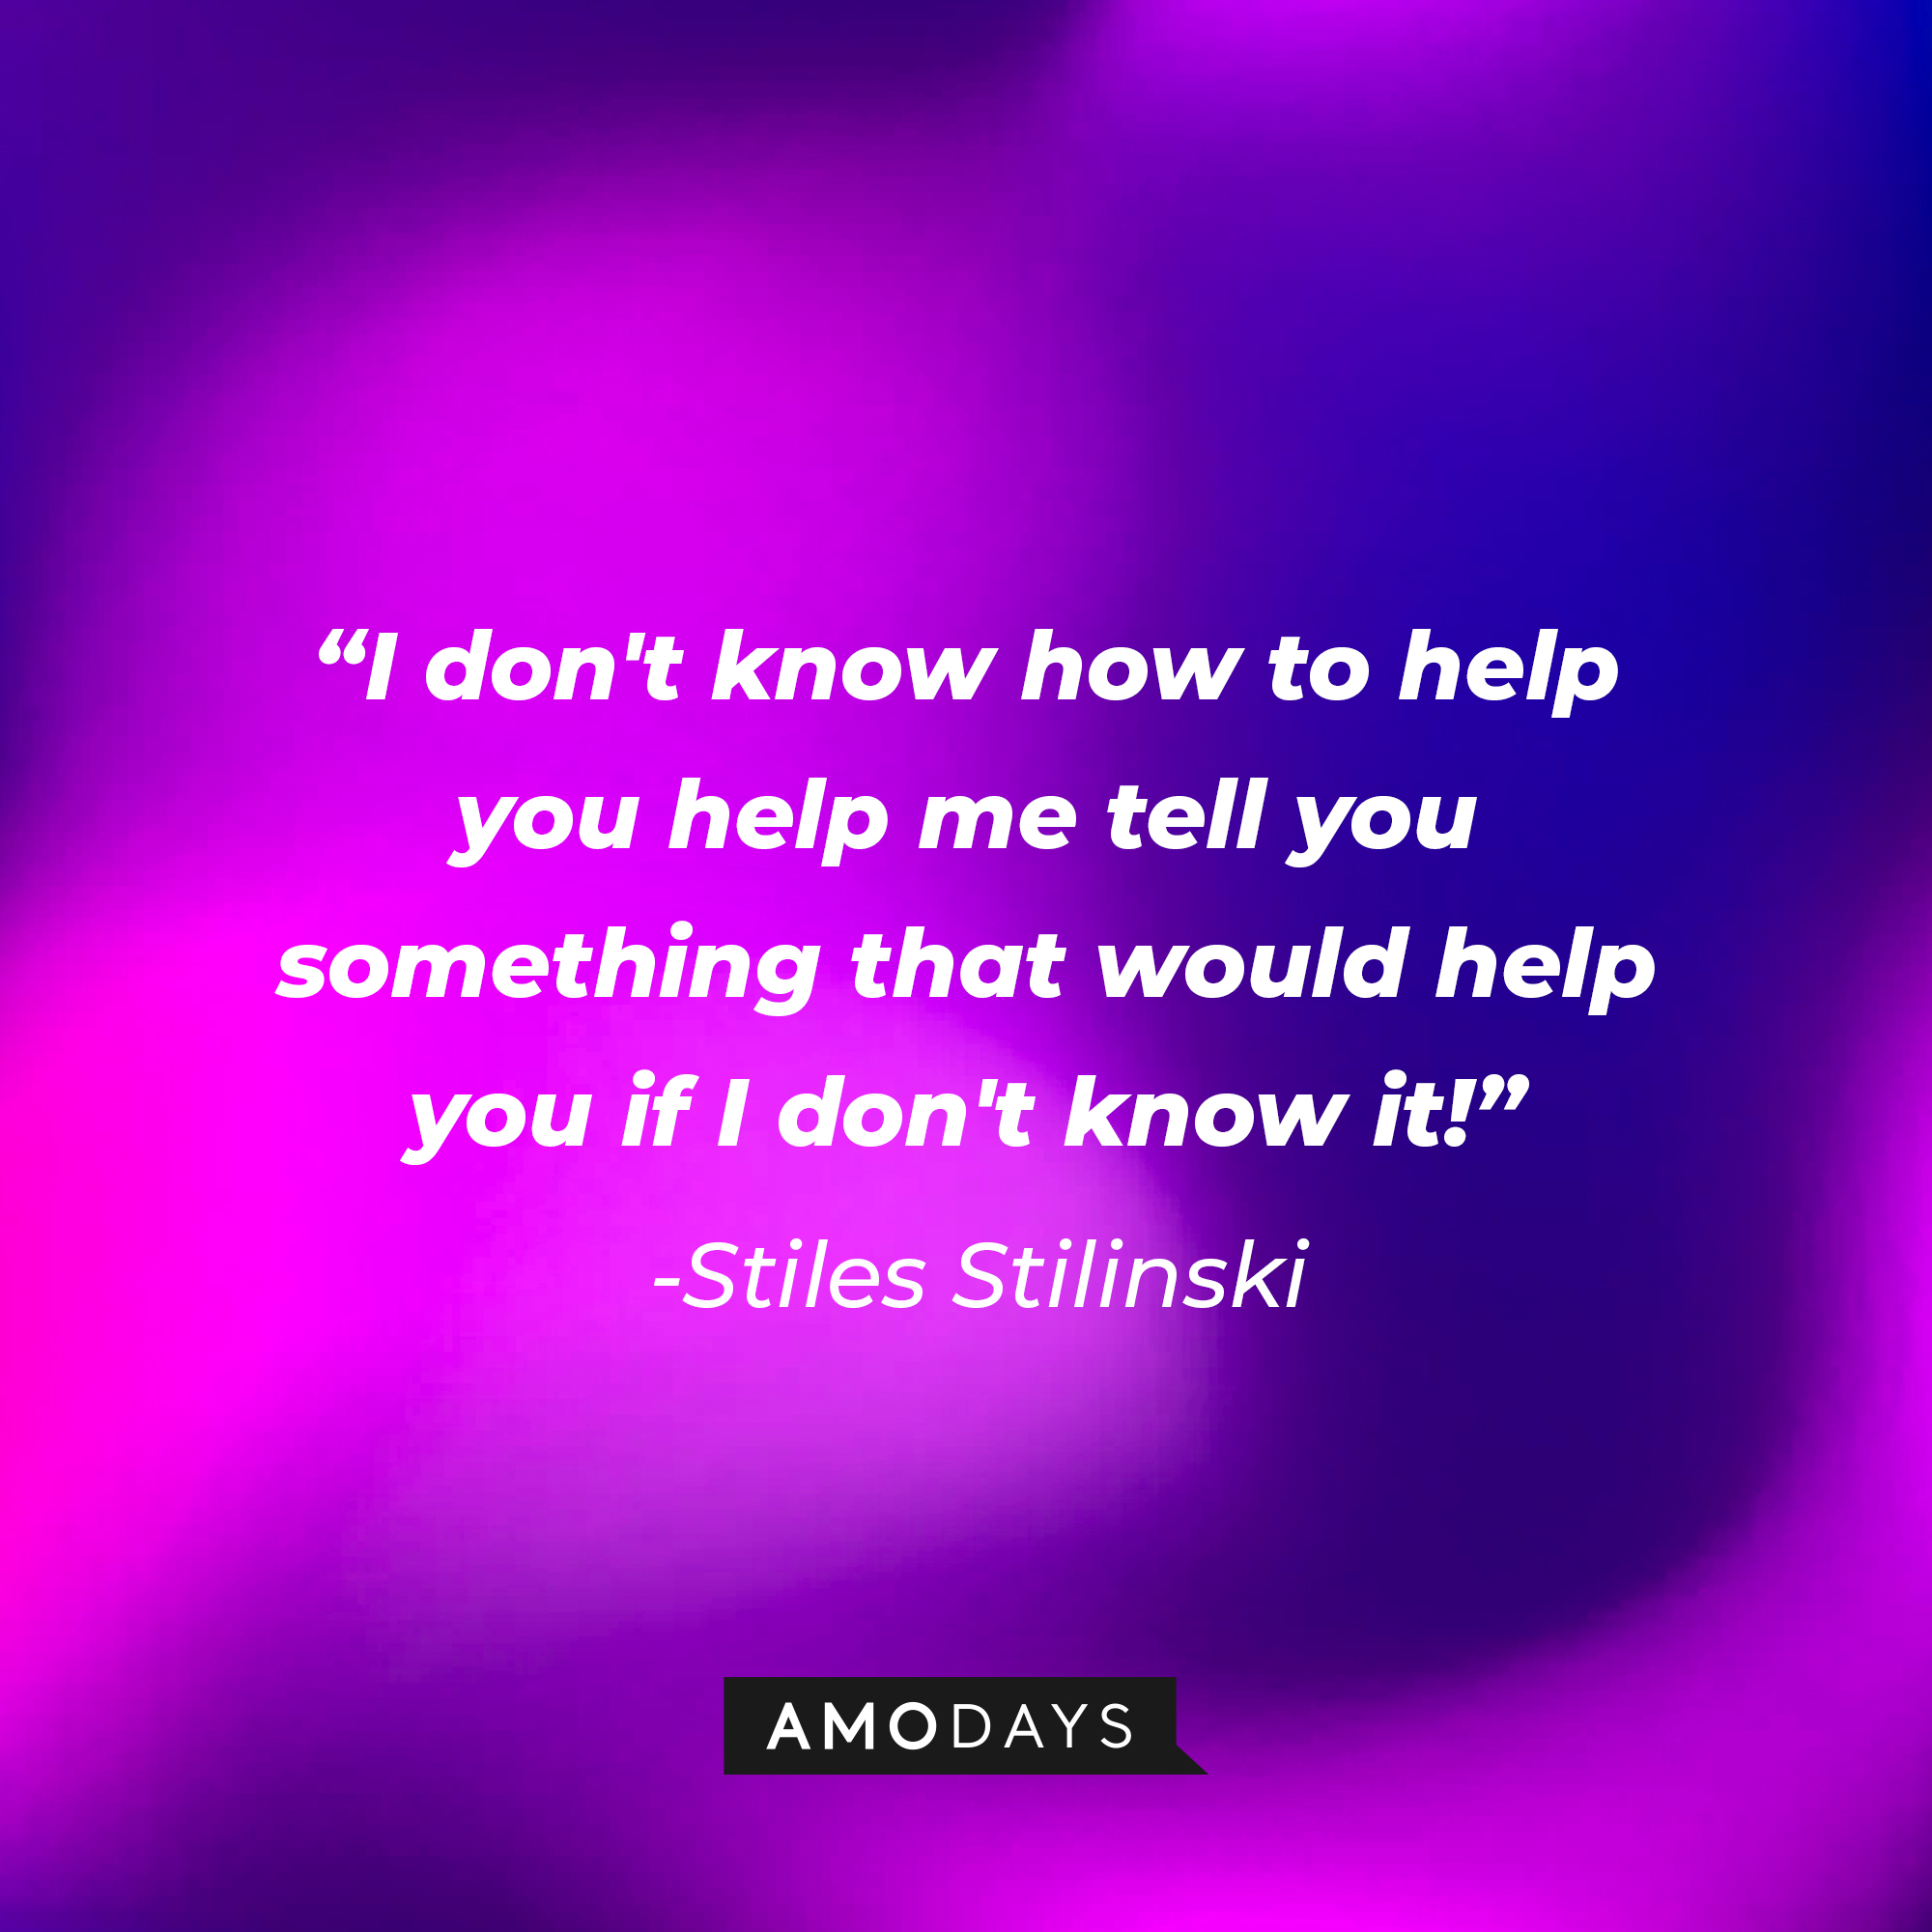 Stiles Stilinski's quote: "I don't know how to help you help me tell you something that would help you if I don't know it!" | Image: AmoDays